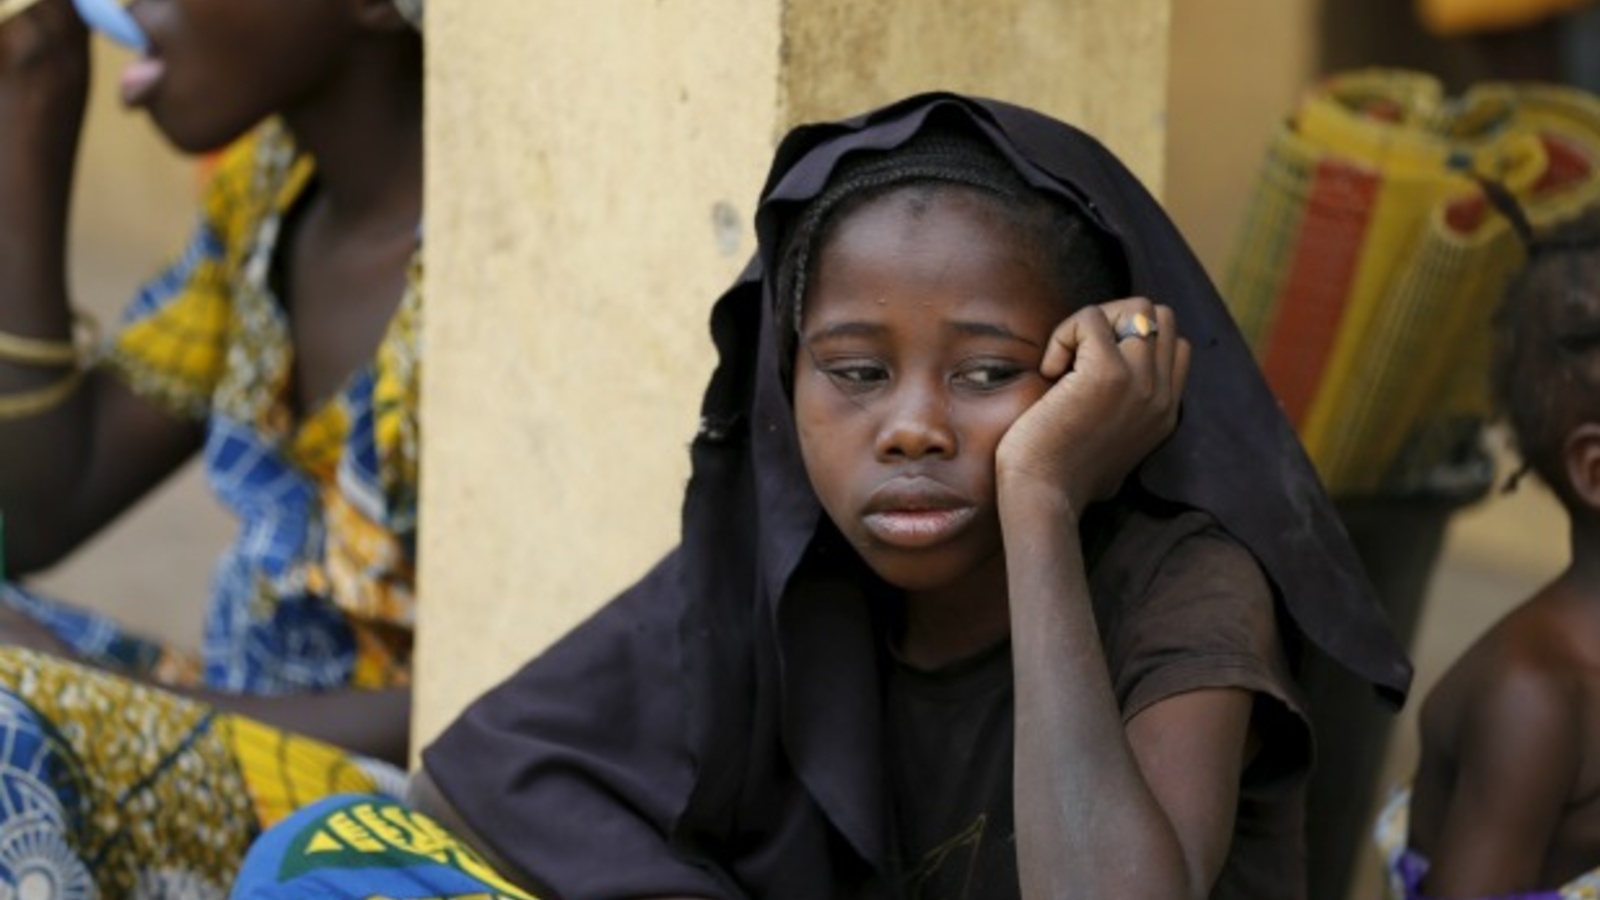 Kidnapping Group Xxx Sex Videos - Boko Haram's Sex Slaves? | Council on Foreign Relations